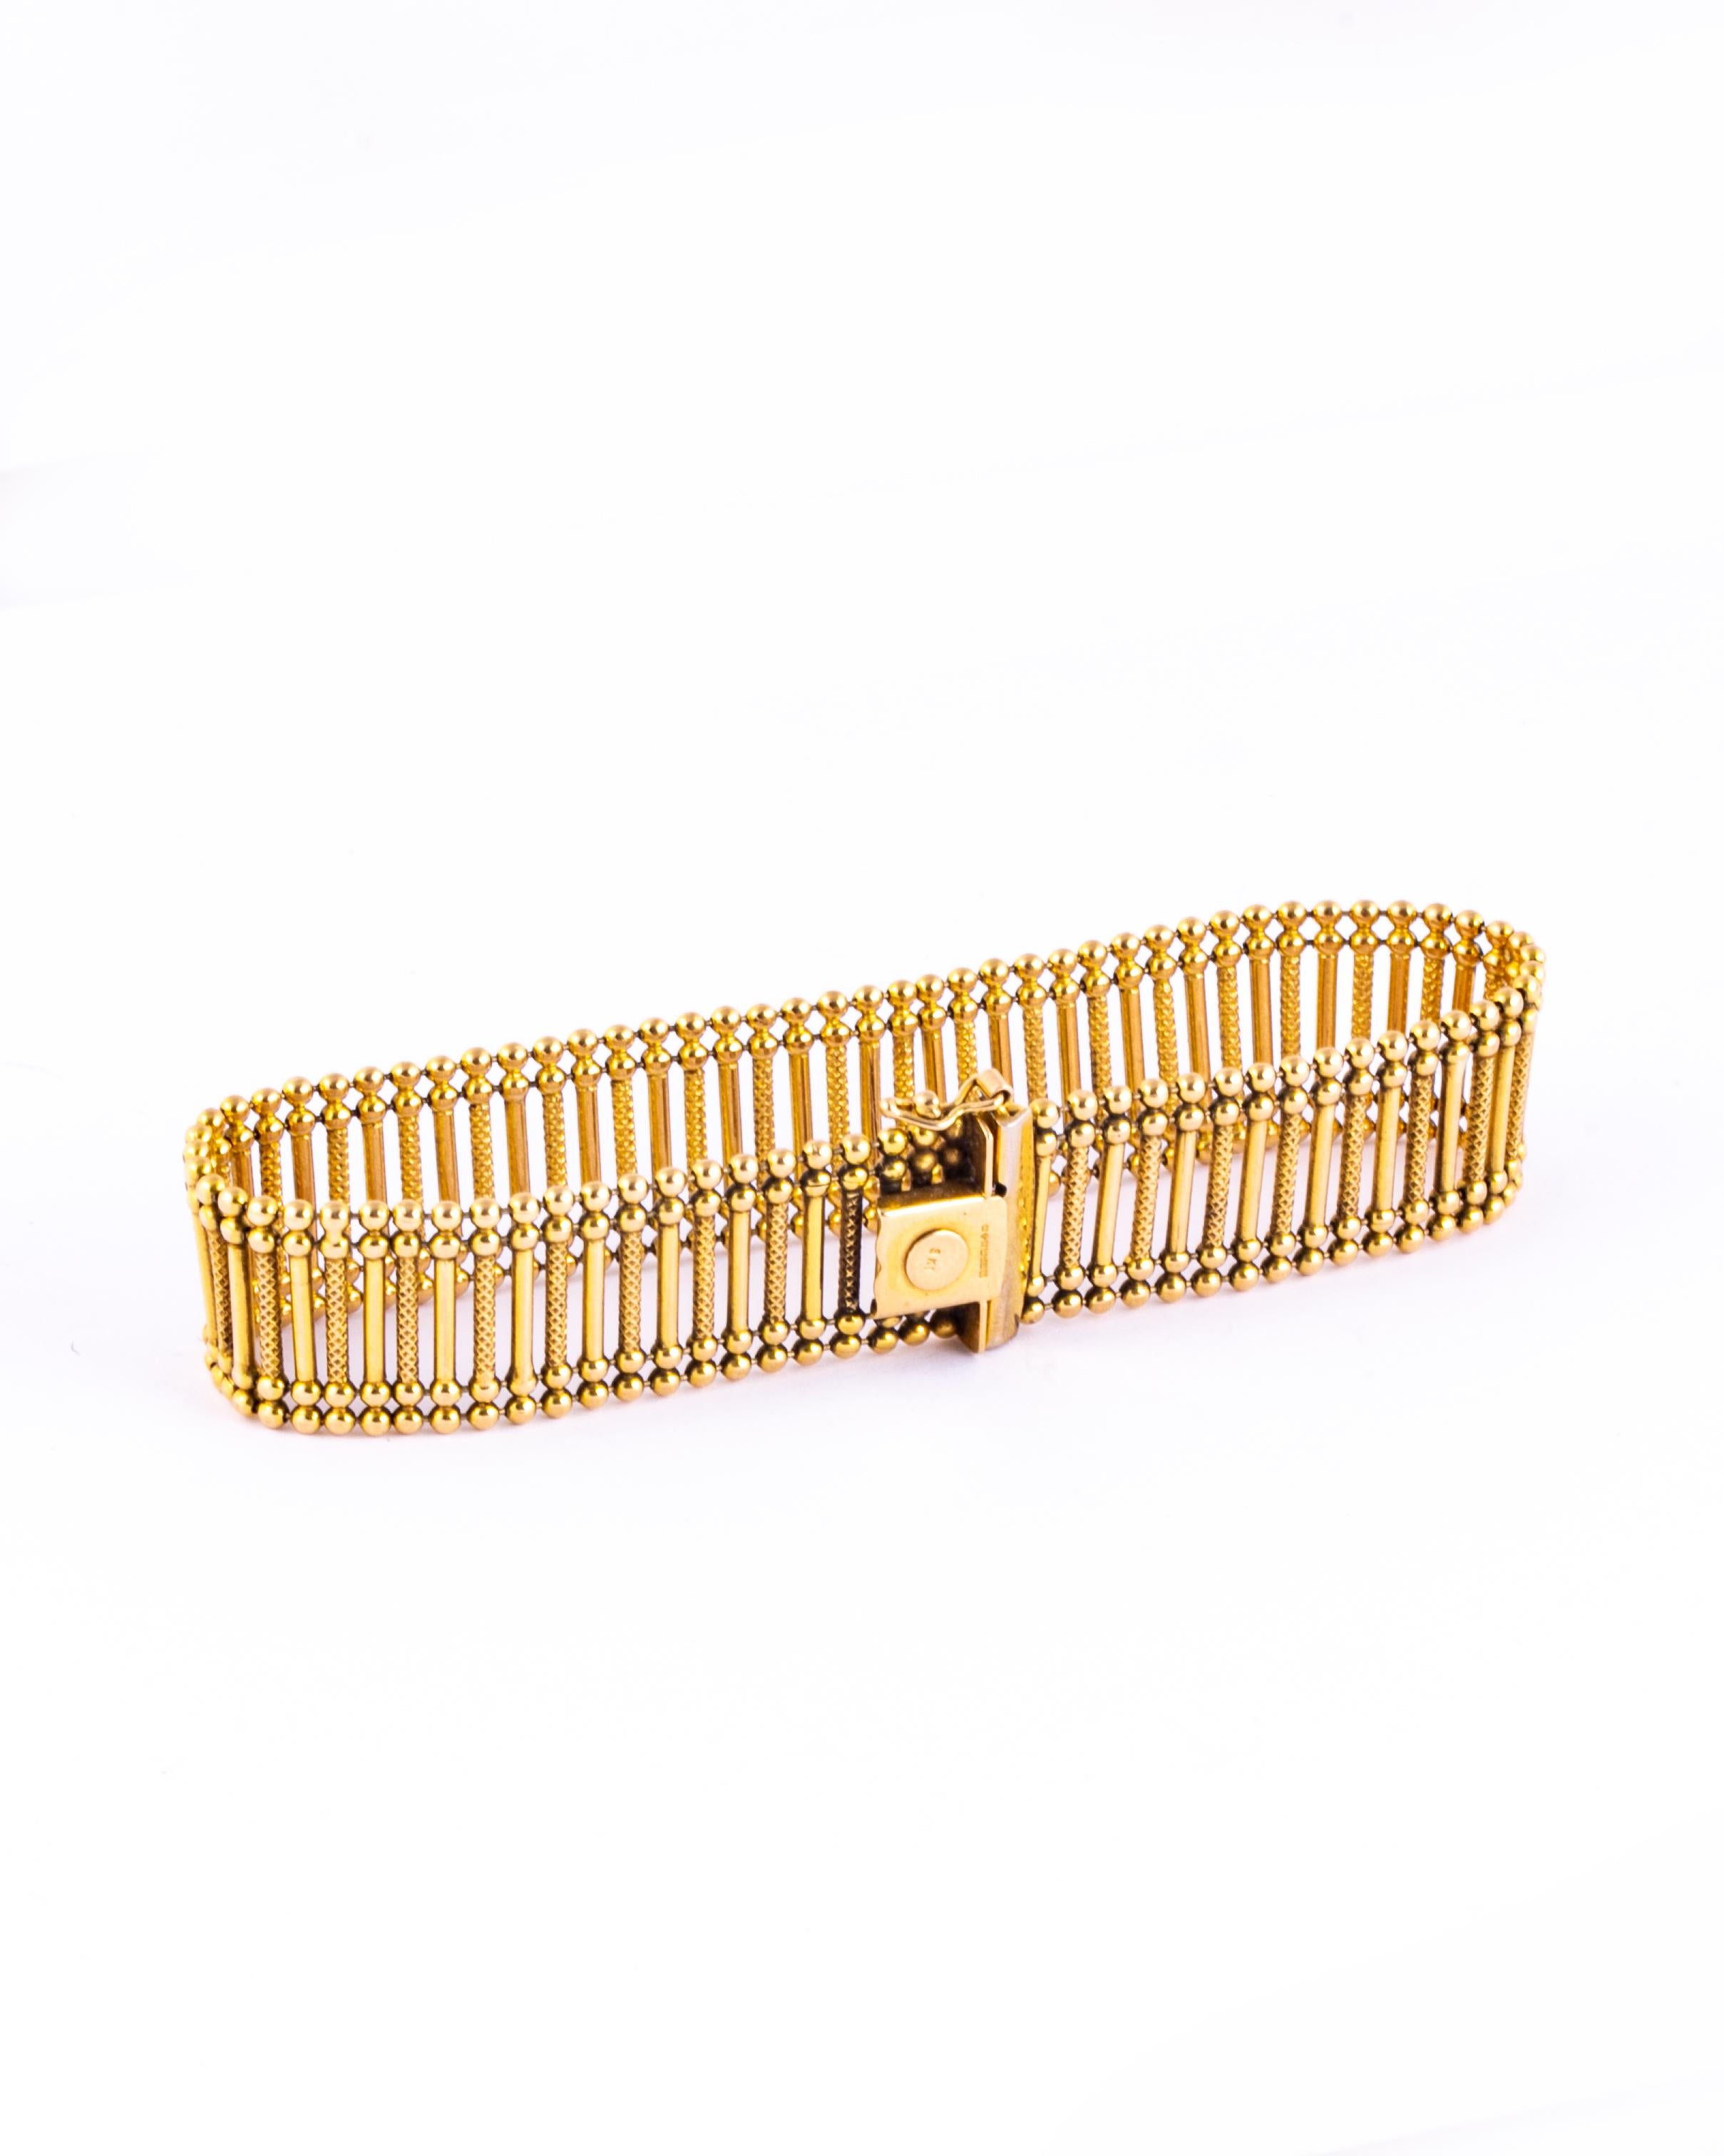 This stunning 9ct gold bracelet is so fancy! It is made up of a smooth and textured batons. The bracelet feels very fluid and is comfortable to wear. 

Length: 19.5cm 
Width: 15mm

Weight: 17.1g